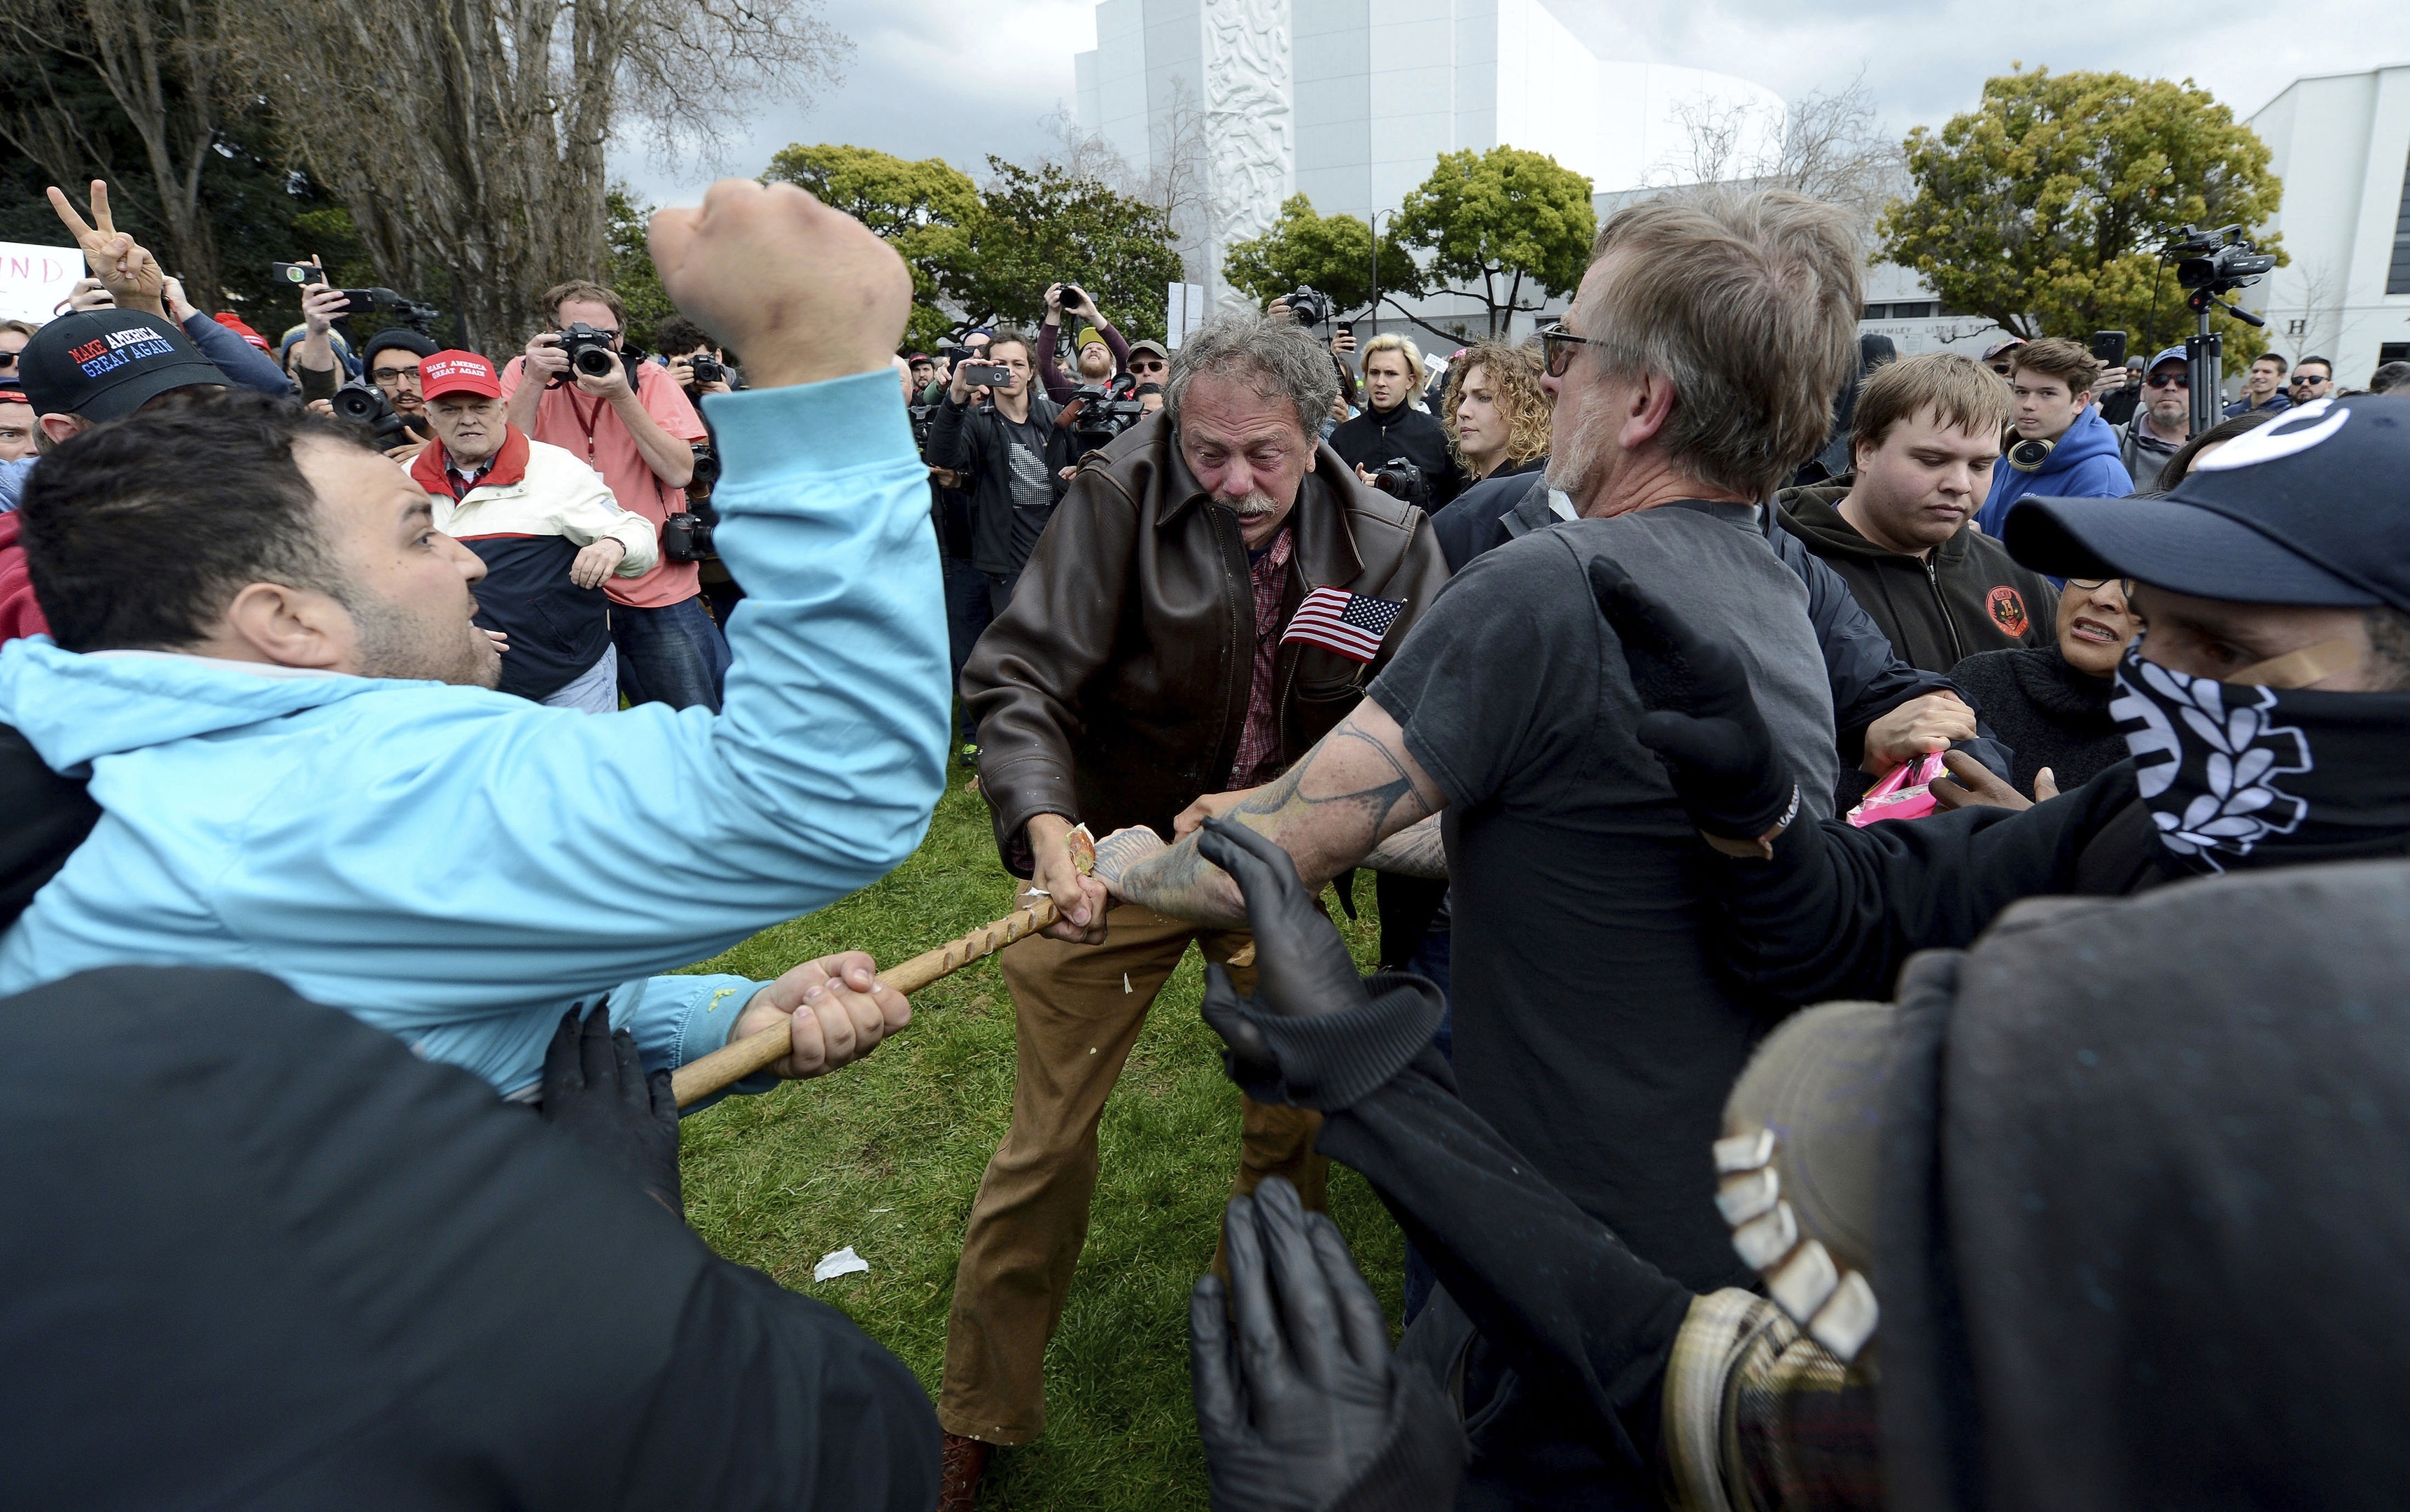 Anti-Trump protesters try to take a large piece of wood away from a Trump supporter at a rally for President Donald Trump at Martin Luther King Jr. Civic Center Park in Berkeley, Calif., Saturday, March 4, 2017. Berkeley Police officers in riot gear arrested at least one person at the rally that attracted hundreds of pro-Trump supporters and opponents at a park less than a mile from the University of California, Berkeley campus.